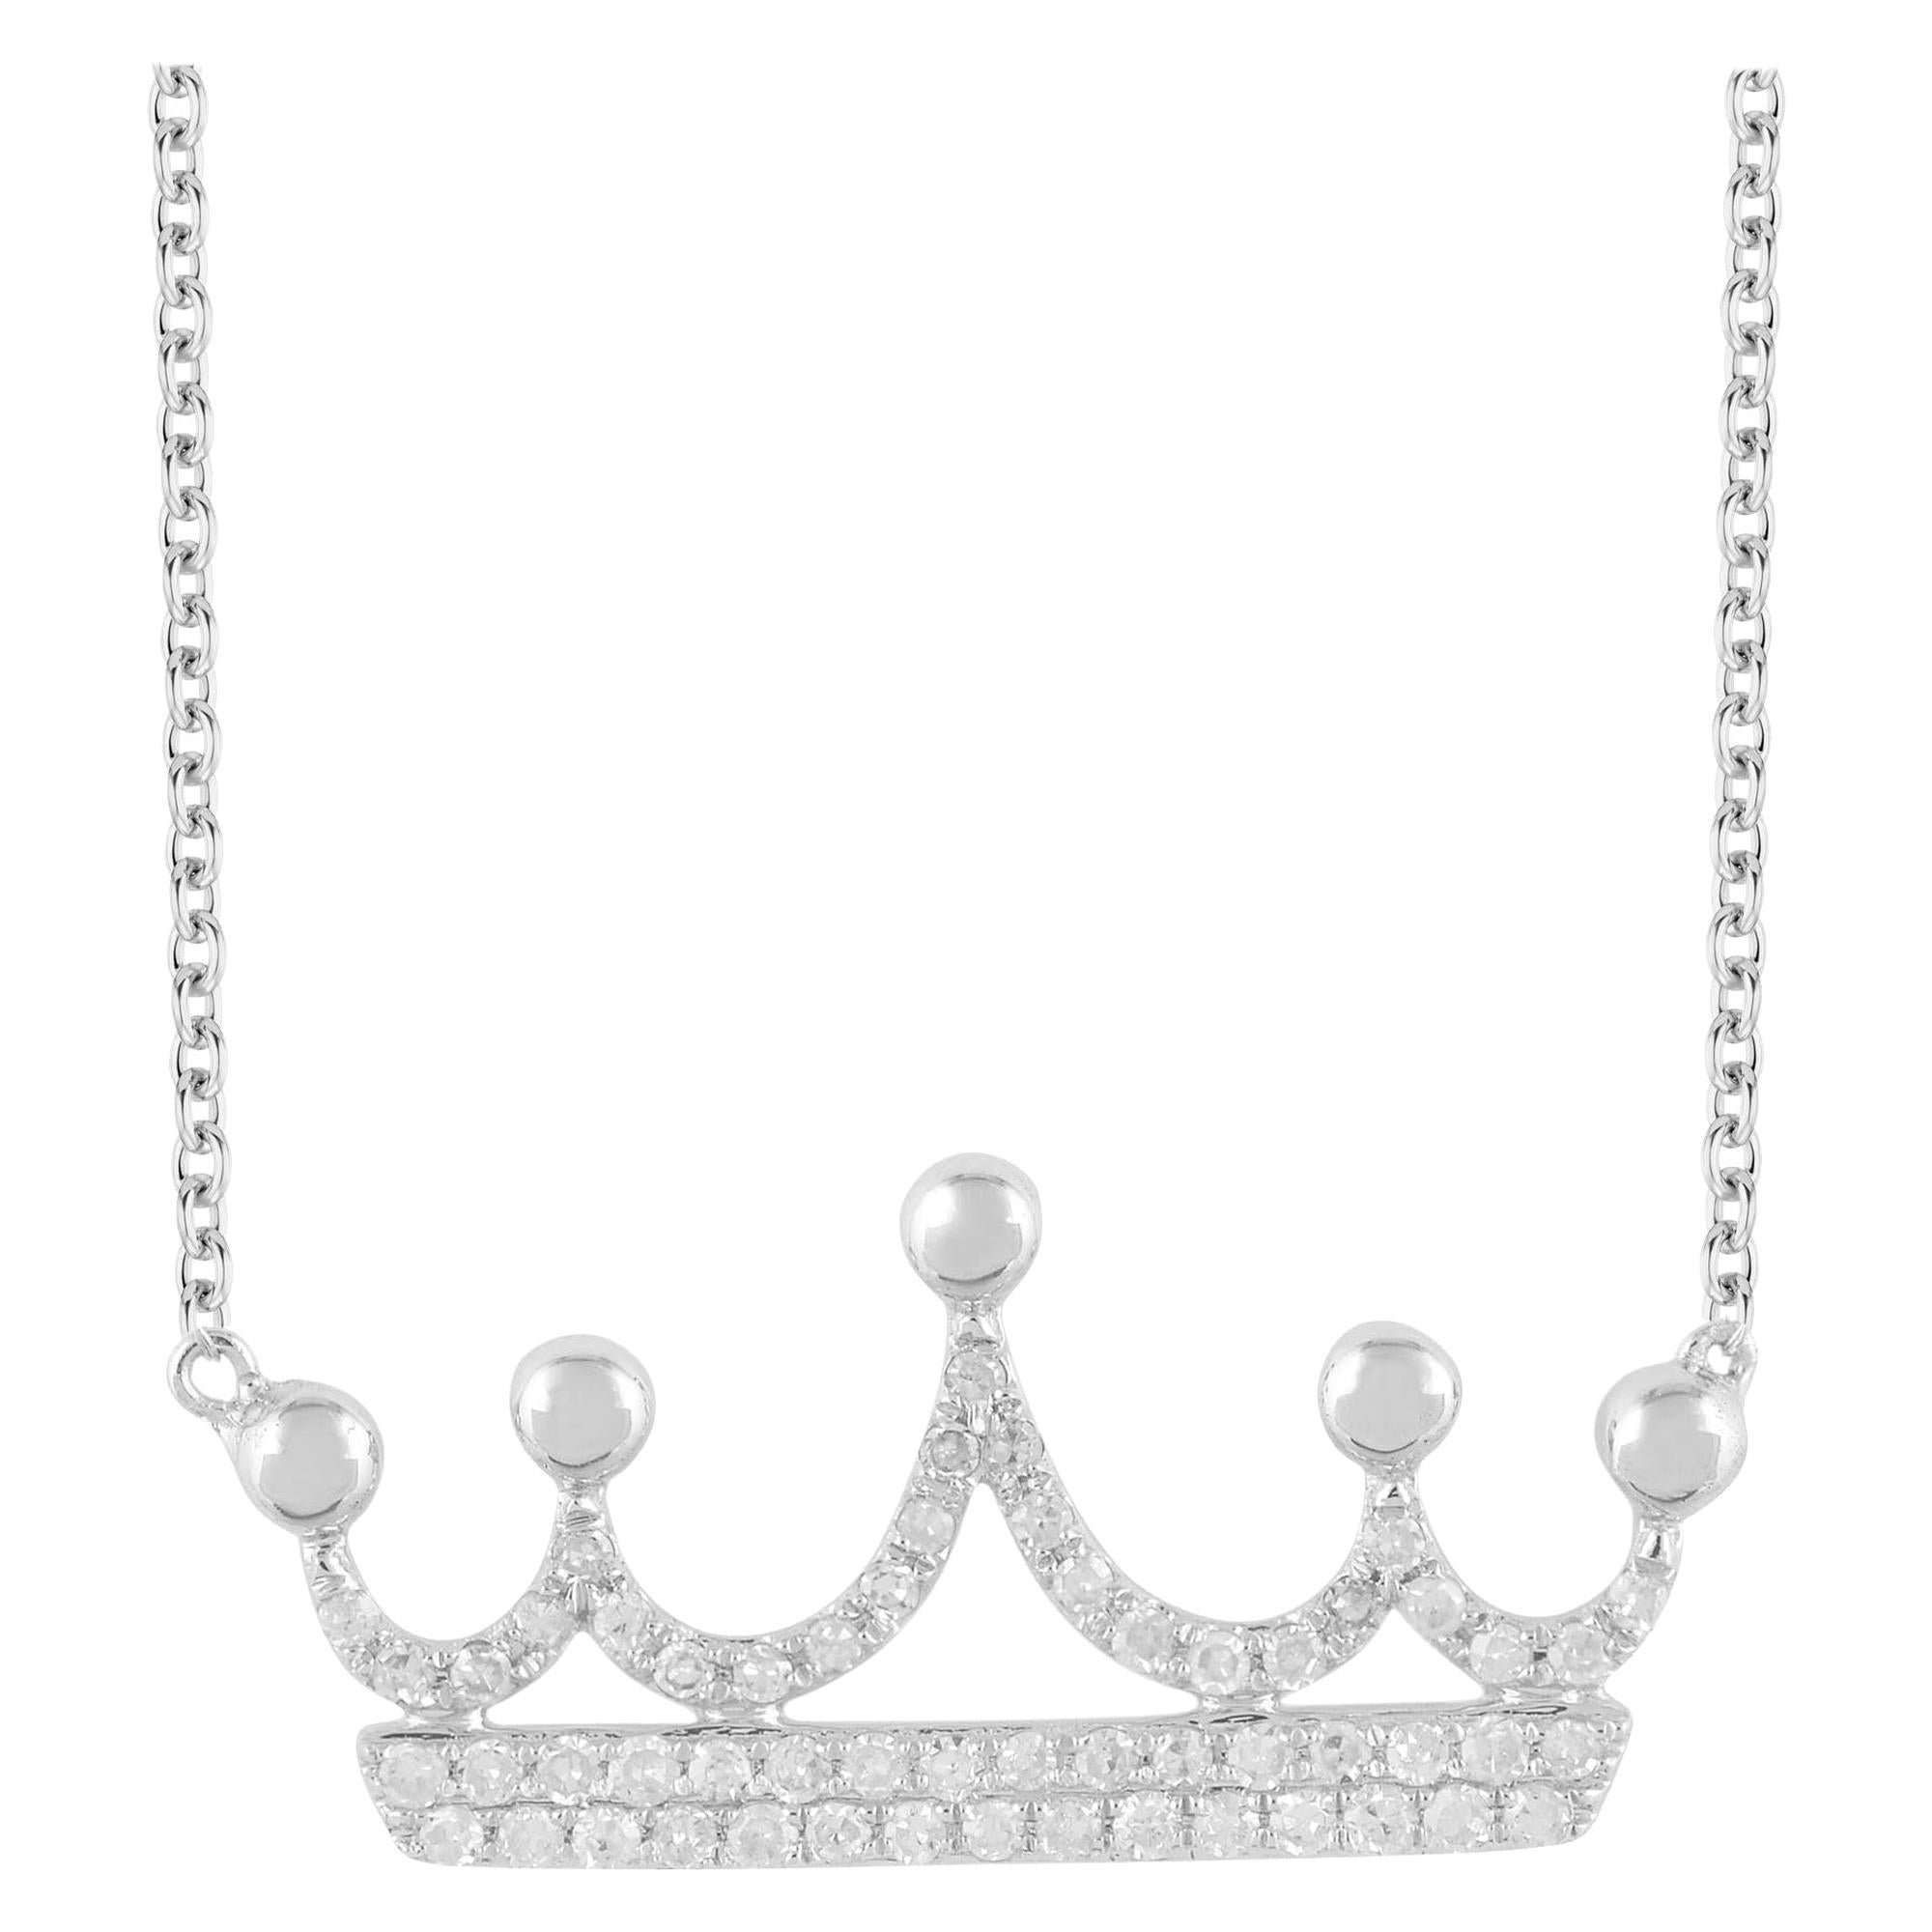 TJD 0.20Carat Diamond 14 K White Gold Charming Crown Necklace with 18 inch chain For Sale